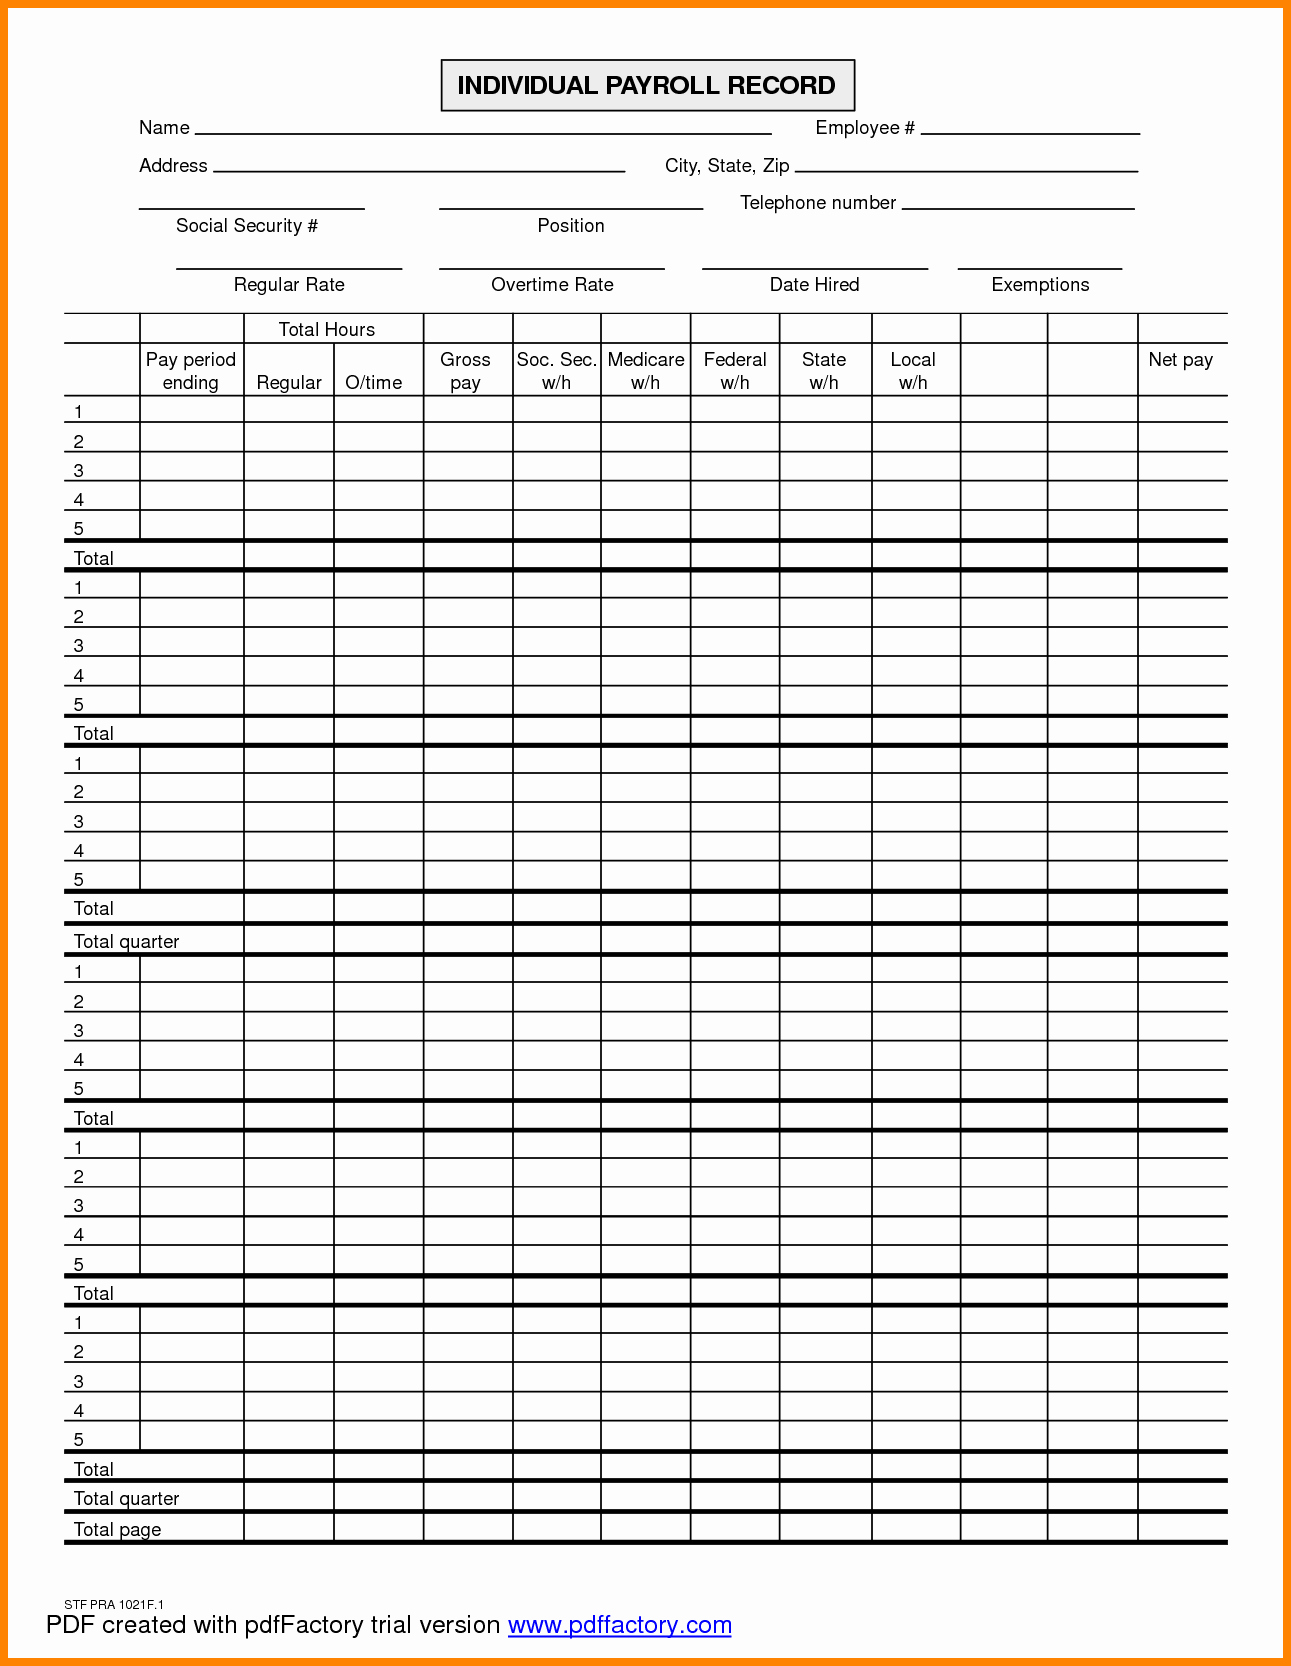 10 Employee Payroll Record form